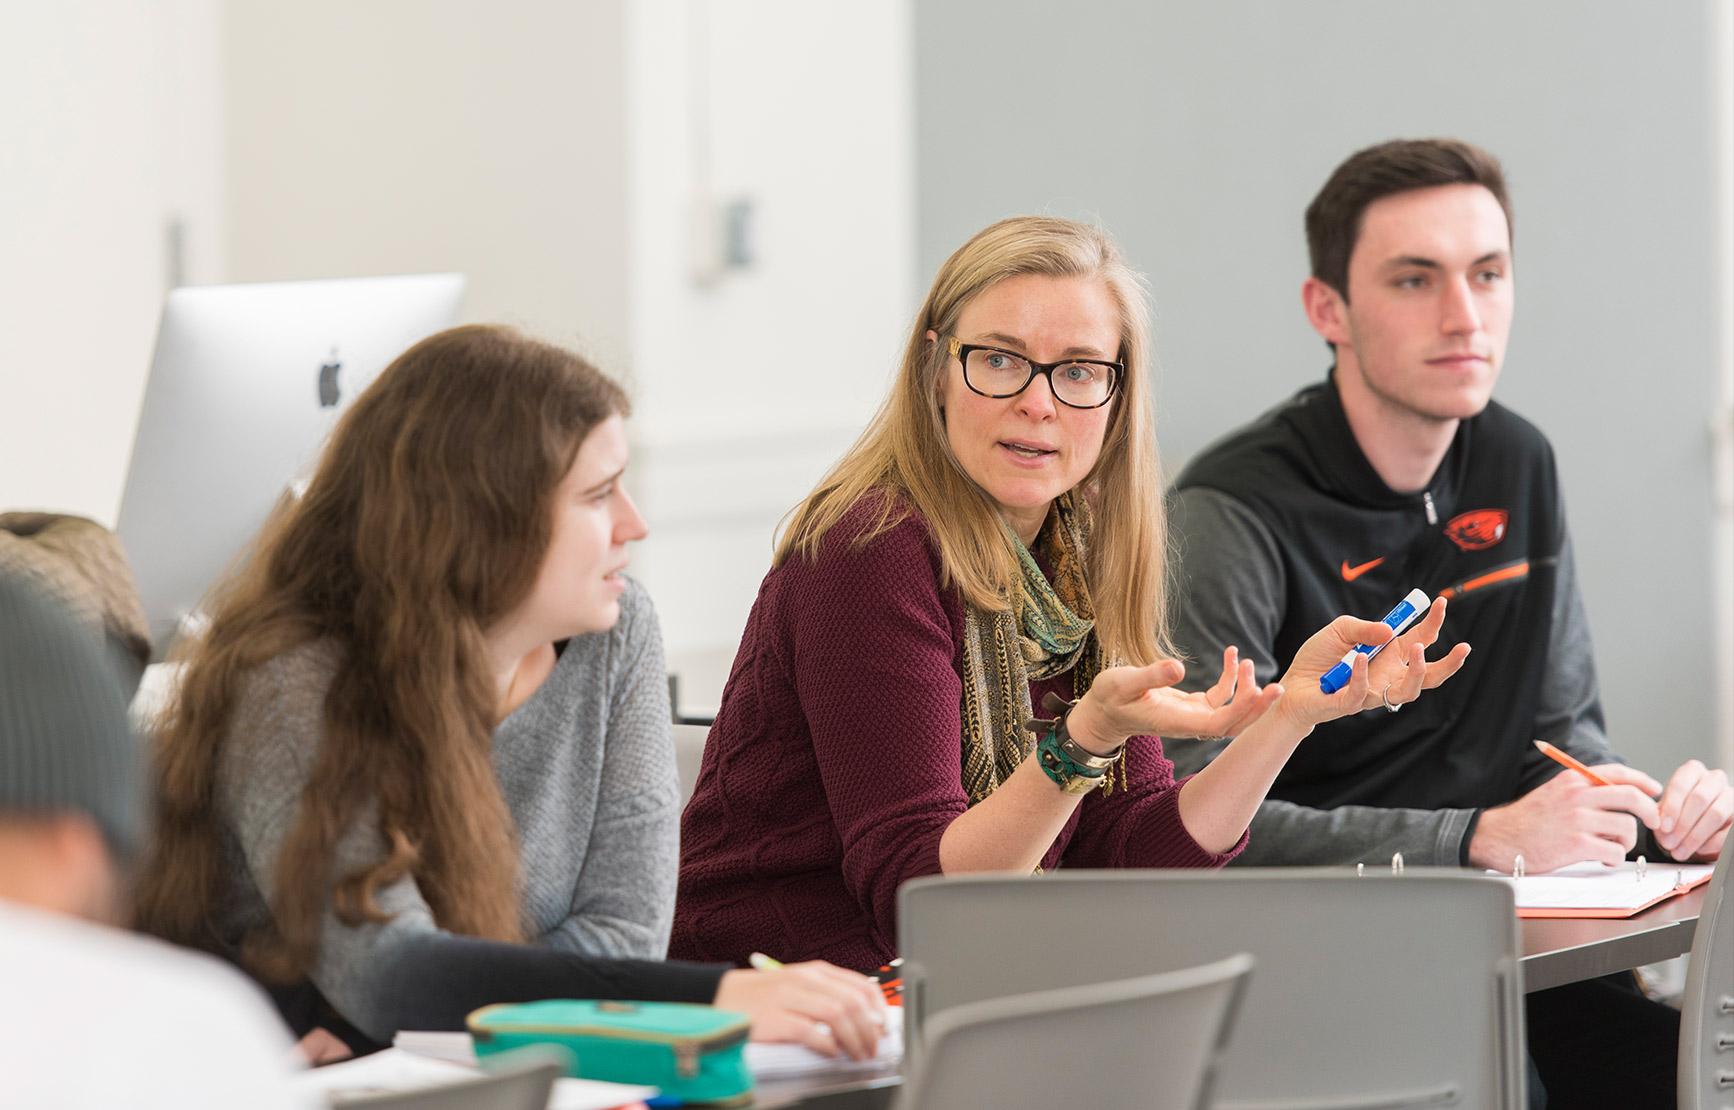 A woman professor sits between two students in a computer lab classroom, explaining concepts